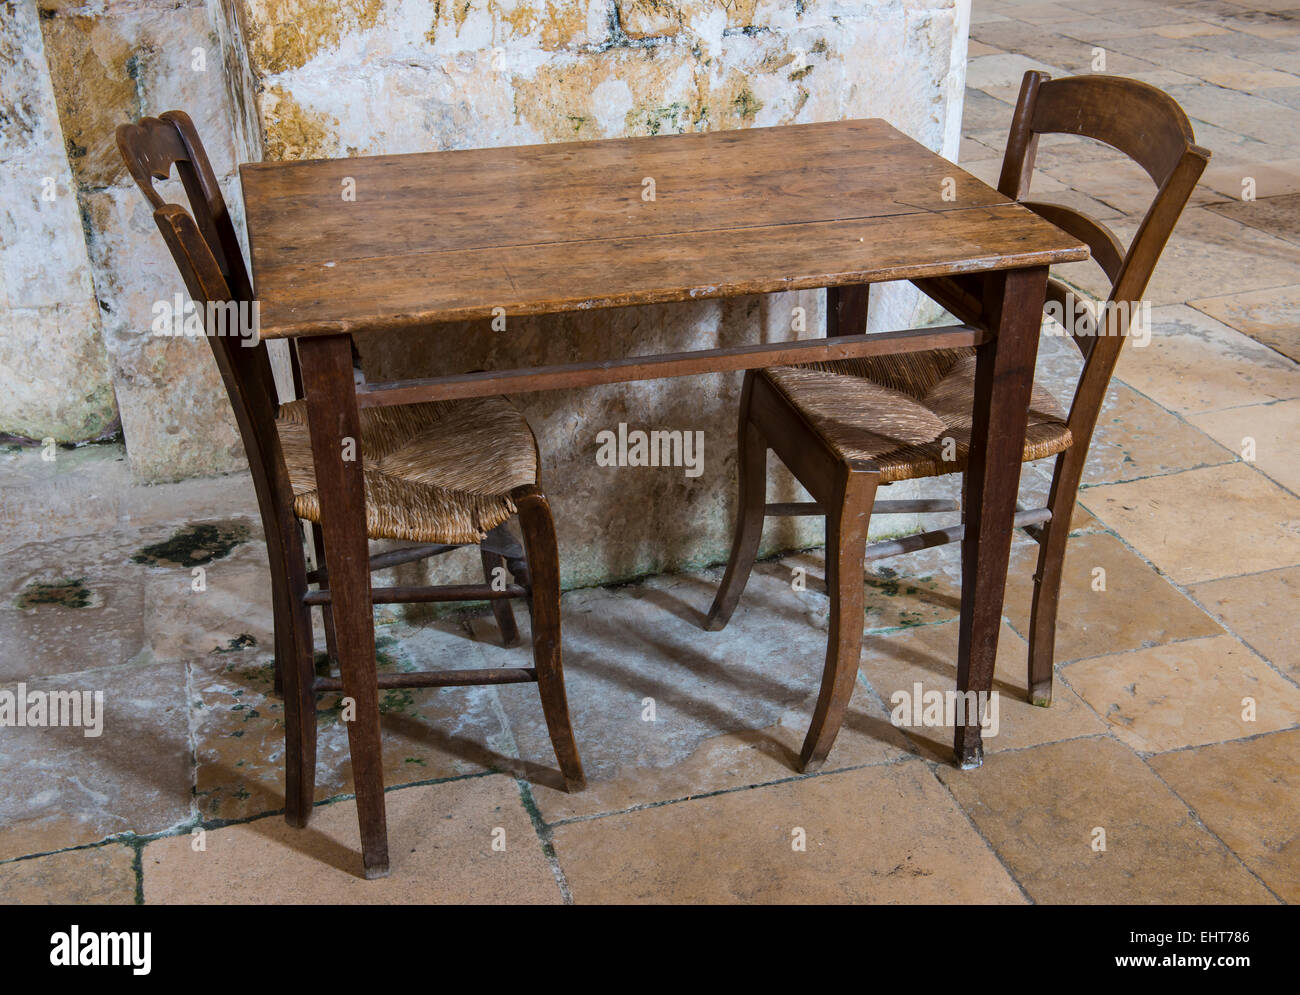 Wooden old table and two wooden chairs on a floor of old tiles Stock Photo  - Alamy